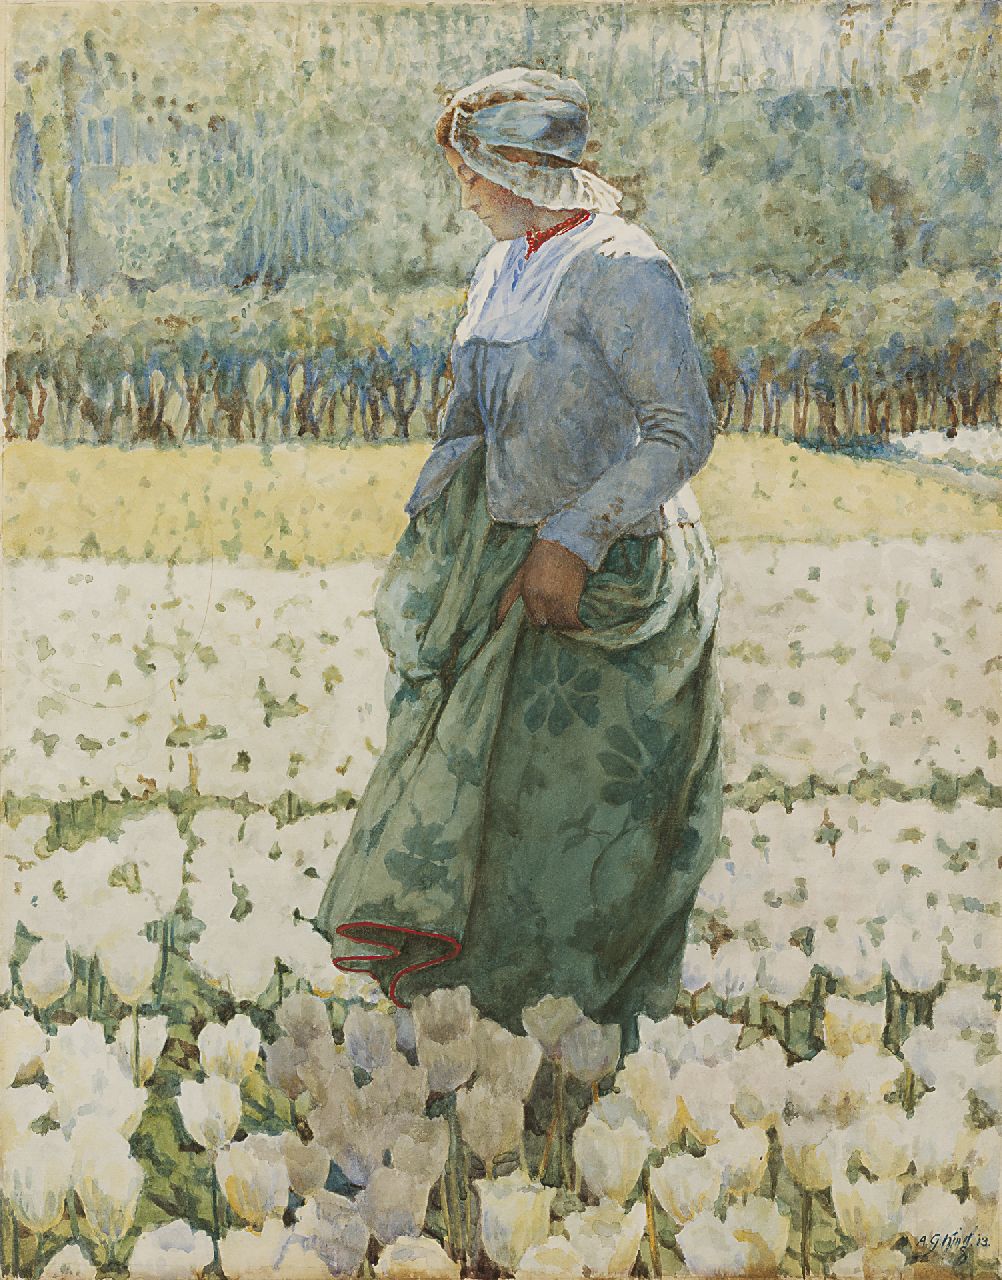 Agnes Gardner King | Picking tulips, watercolour on paper, 47.4 x 37.3 cm, signed l.r. and dated '13